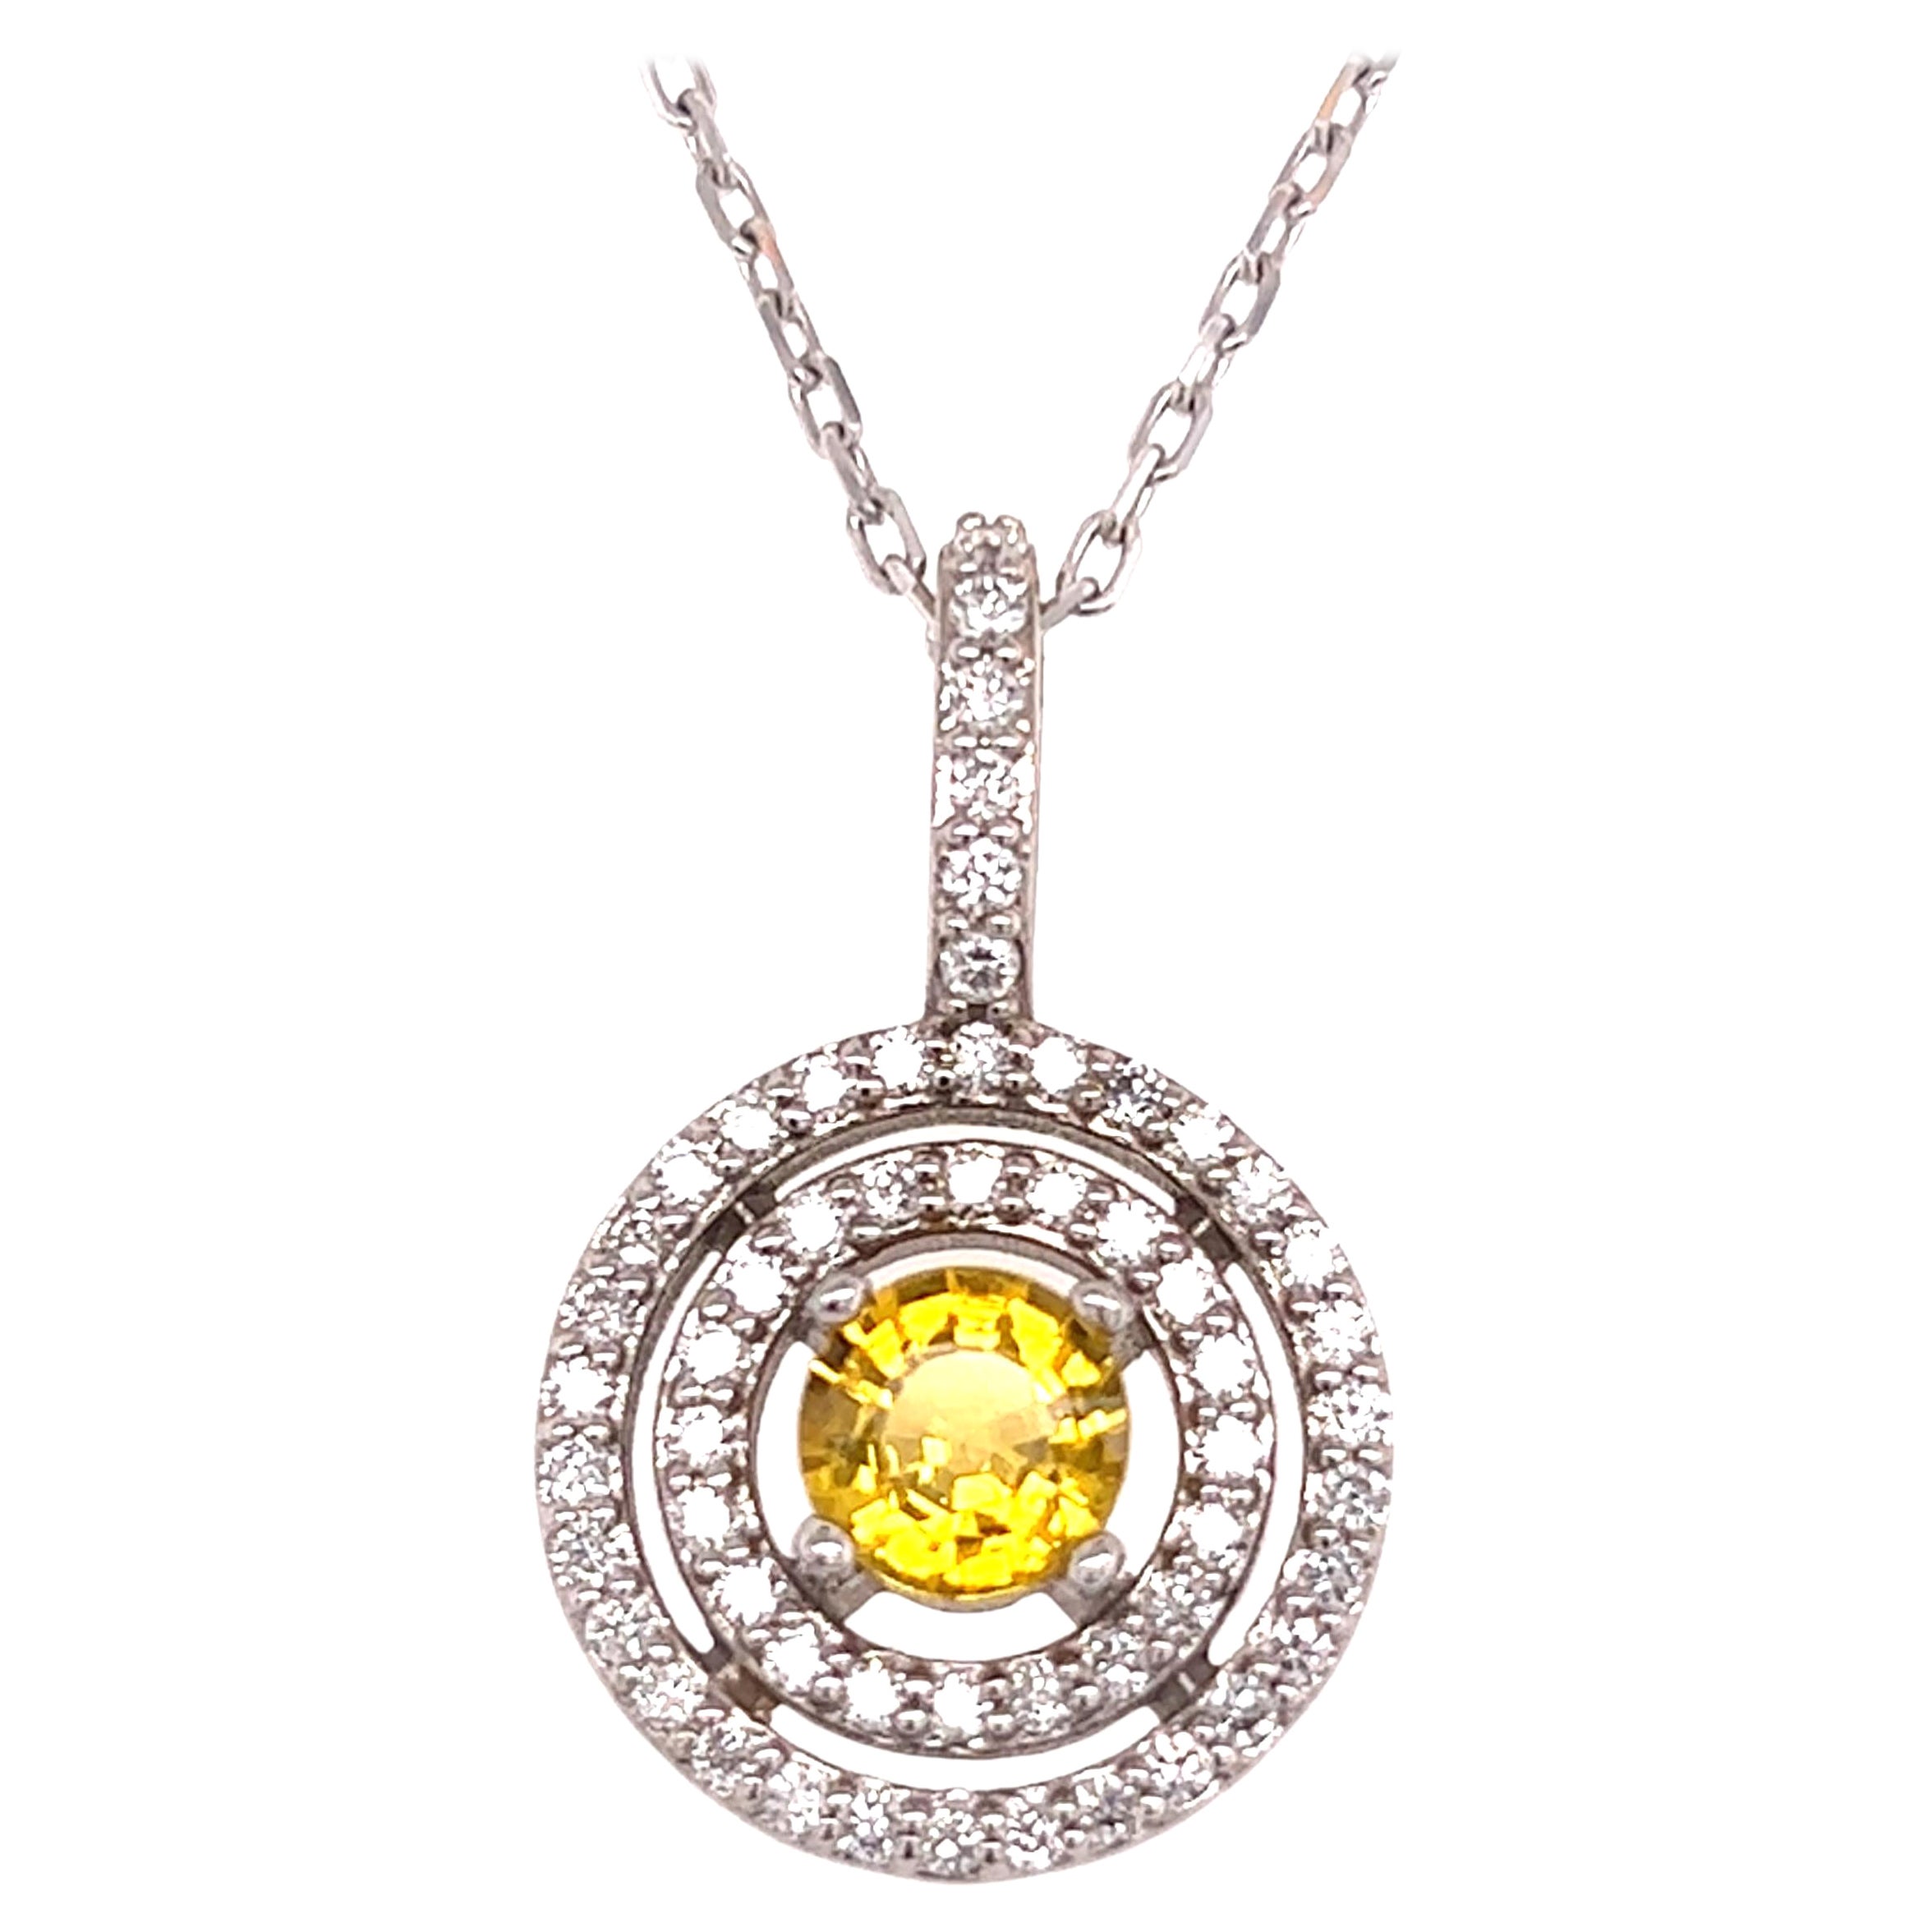 Natural Sapphire Diamond Necklace 14k Gold 1.51 TCW Certified For Sale